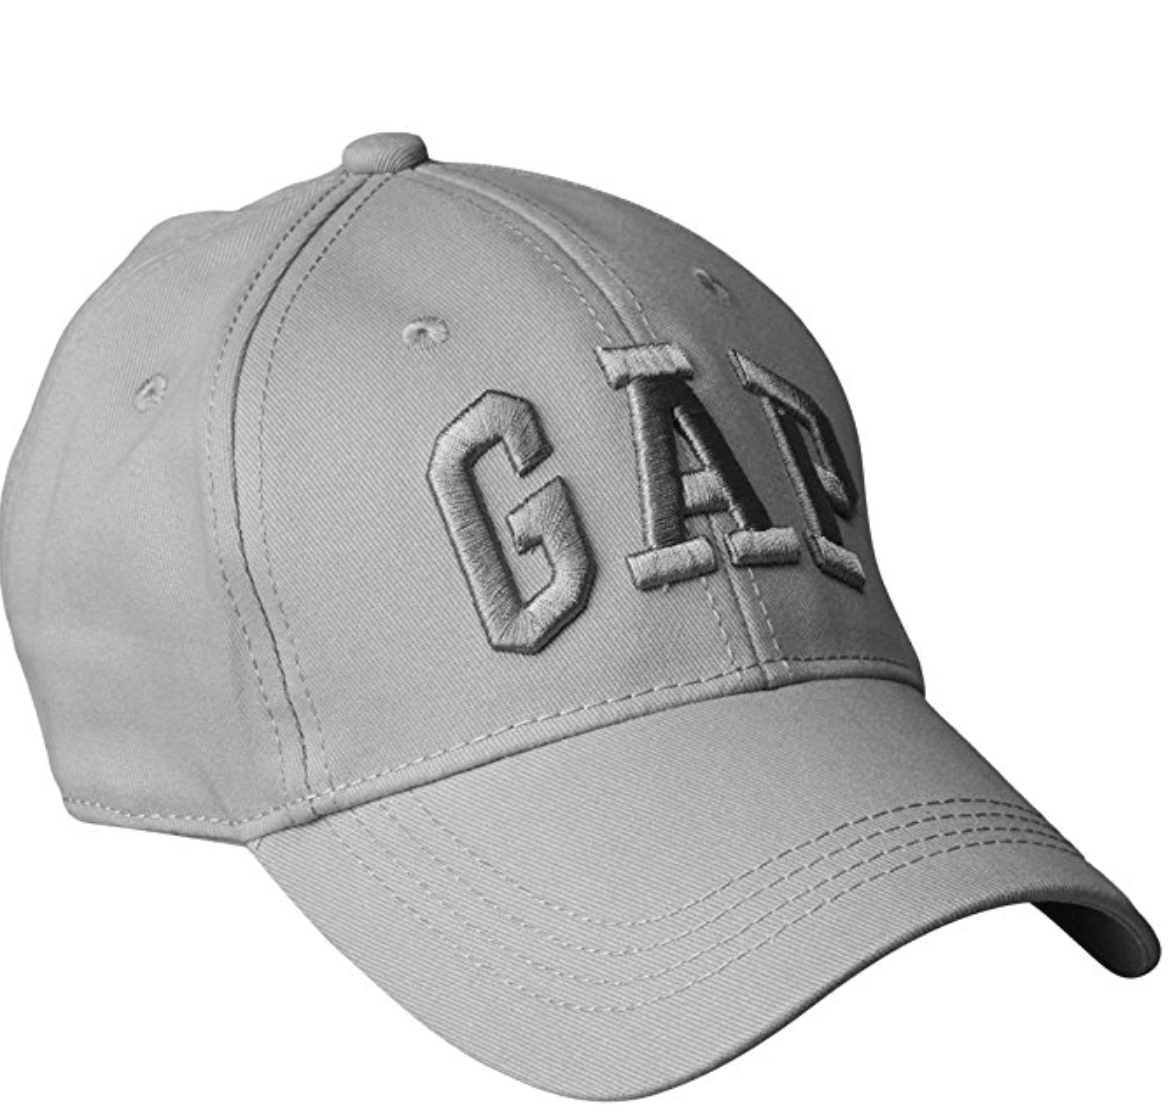 Amazon Offers – Buy GAP Men’s Baseball Cap at only Rs. 649